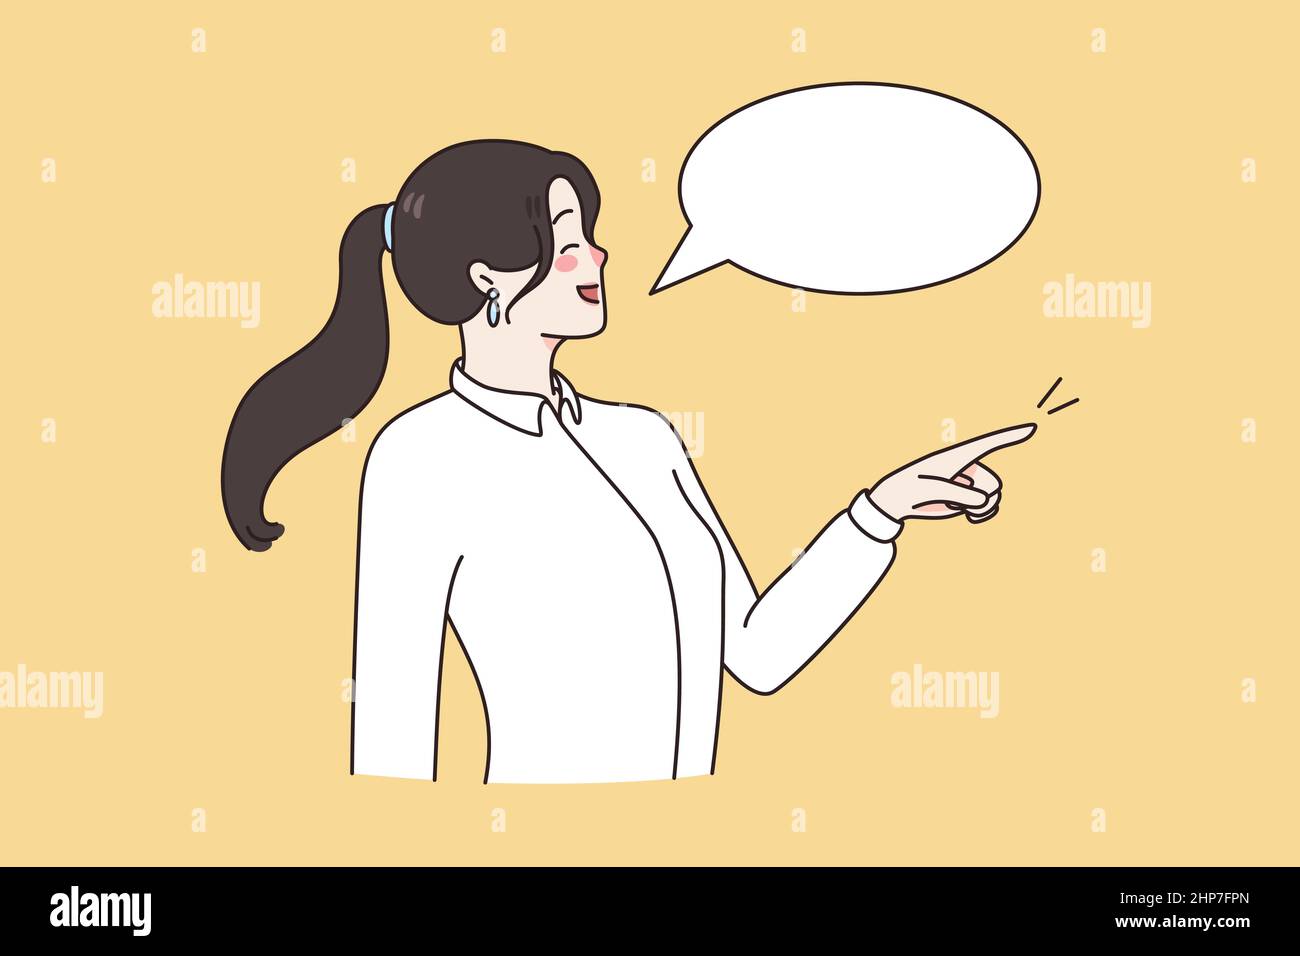 Communication and speech bubble concept Stock Vector